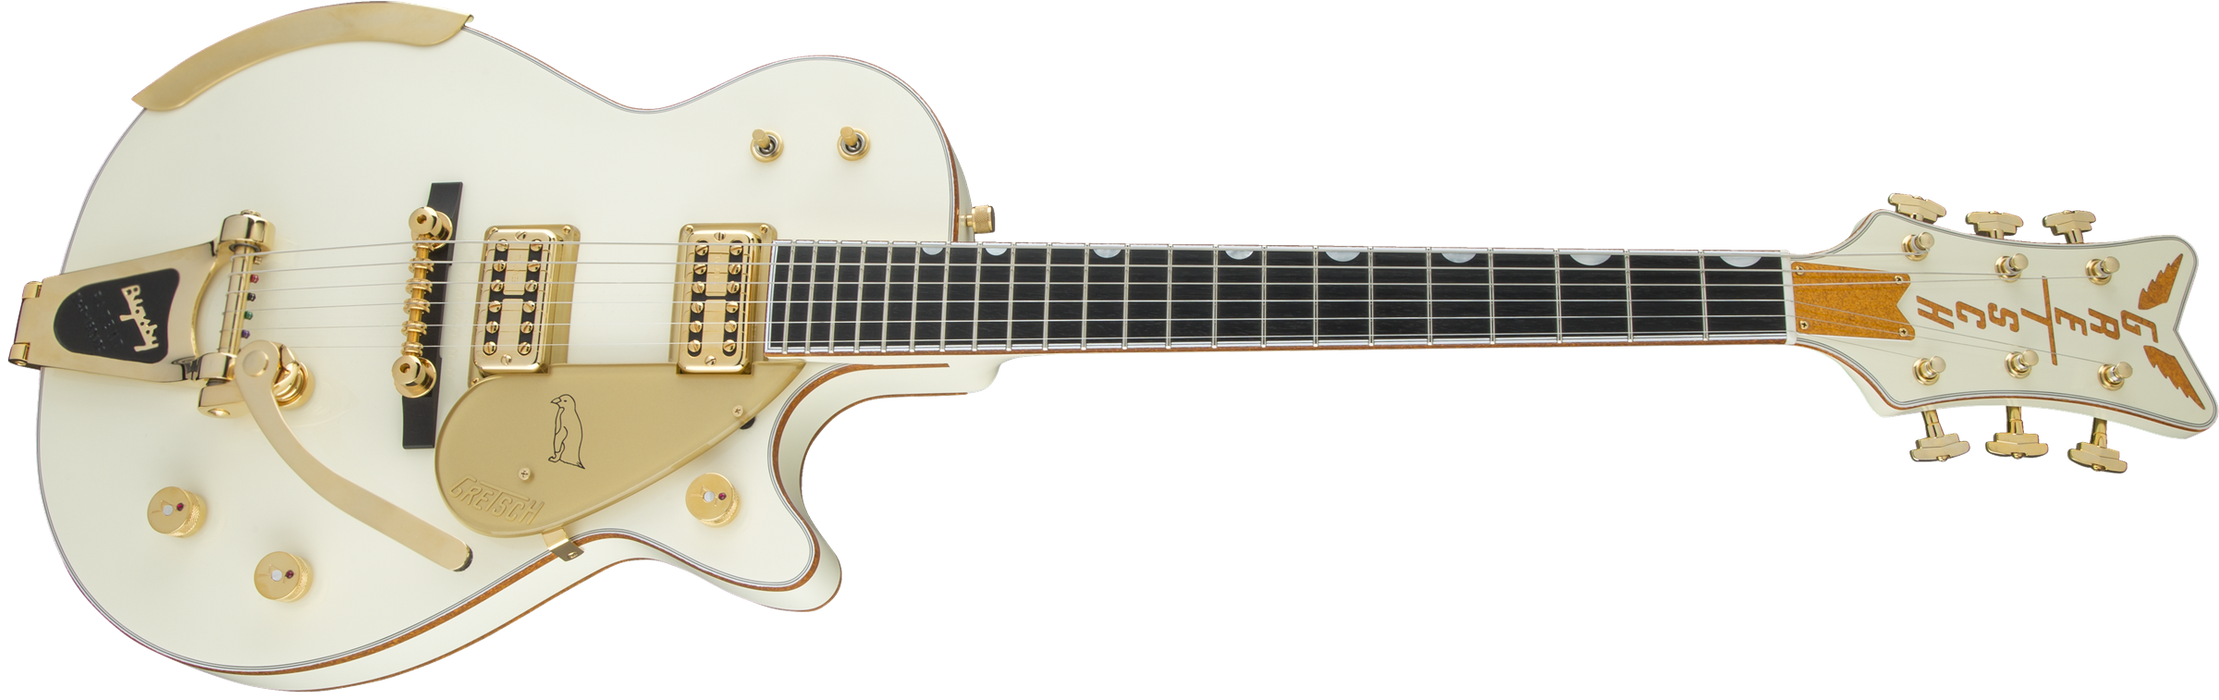 Gretsch G6134T-58 Vintage Select ’58 Penguin with Bigsby TV Jones Vintage White With Case